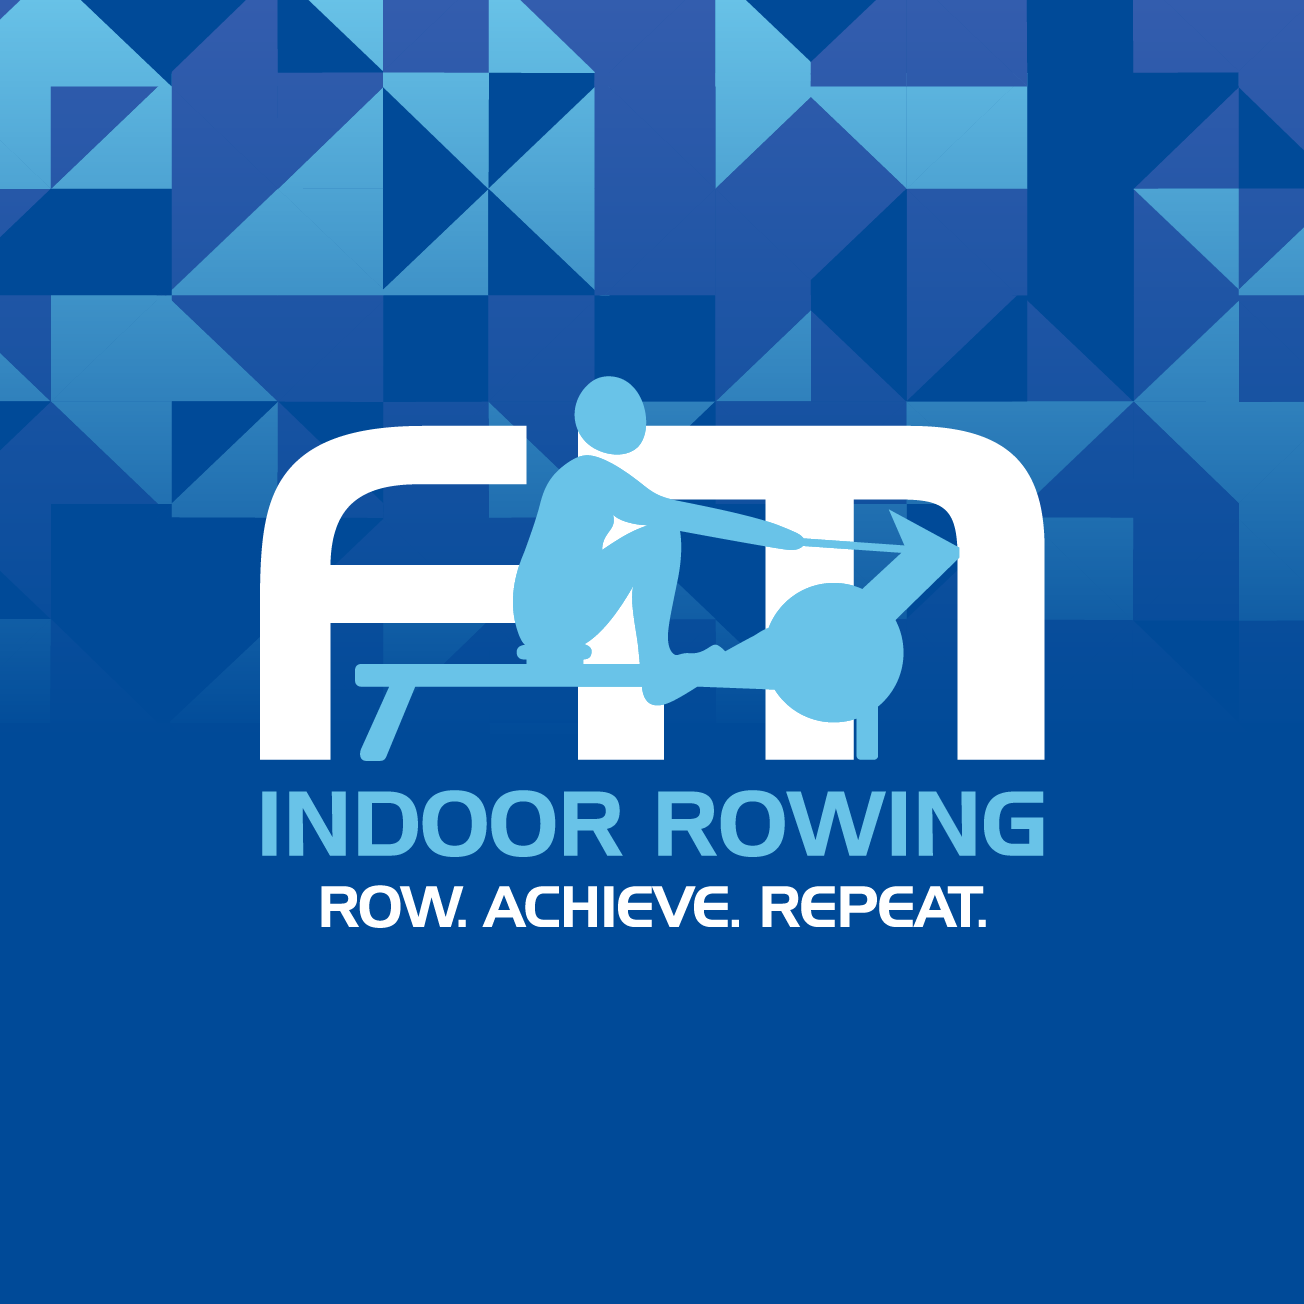 Club Image for FM INDOOR ROWING